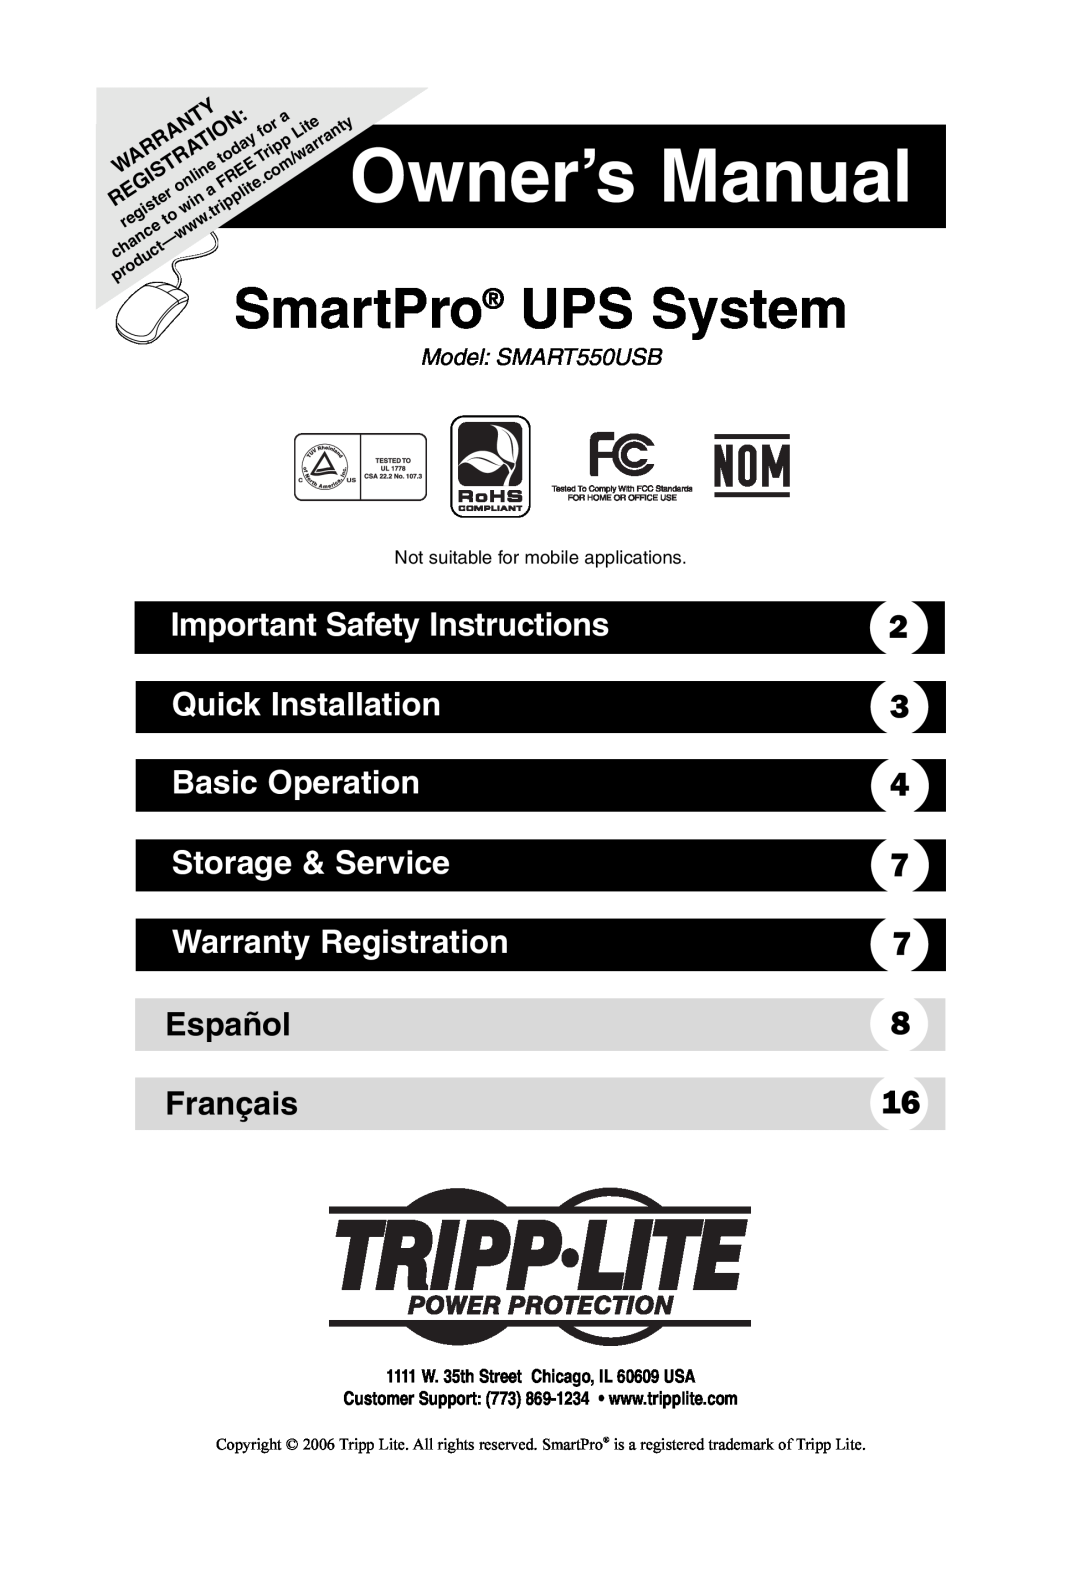 Tripp Lite SMART550USB owner manual Owner’s Manual, SmartPro UPS System, Important Safety Instructions, Quick Installation 